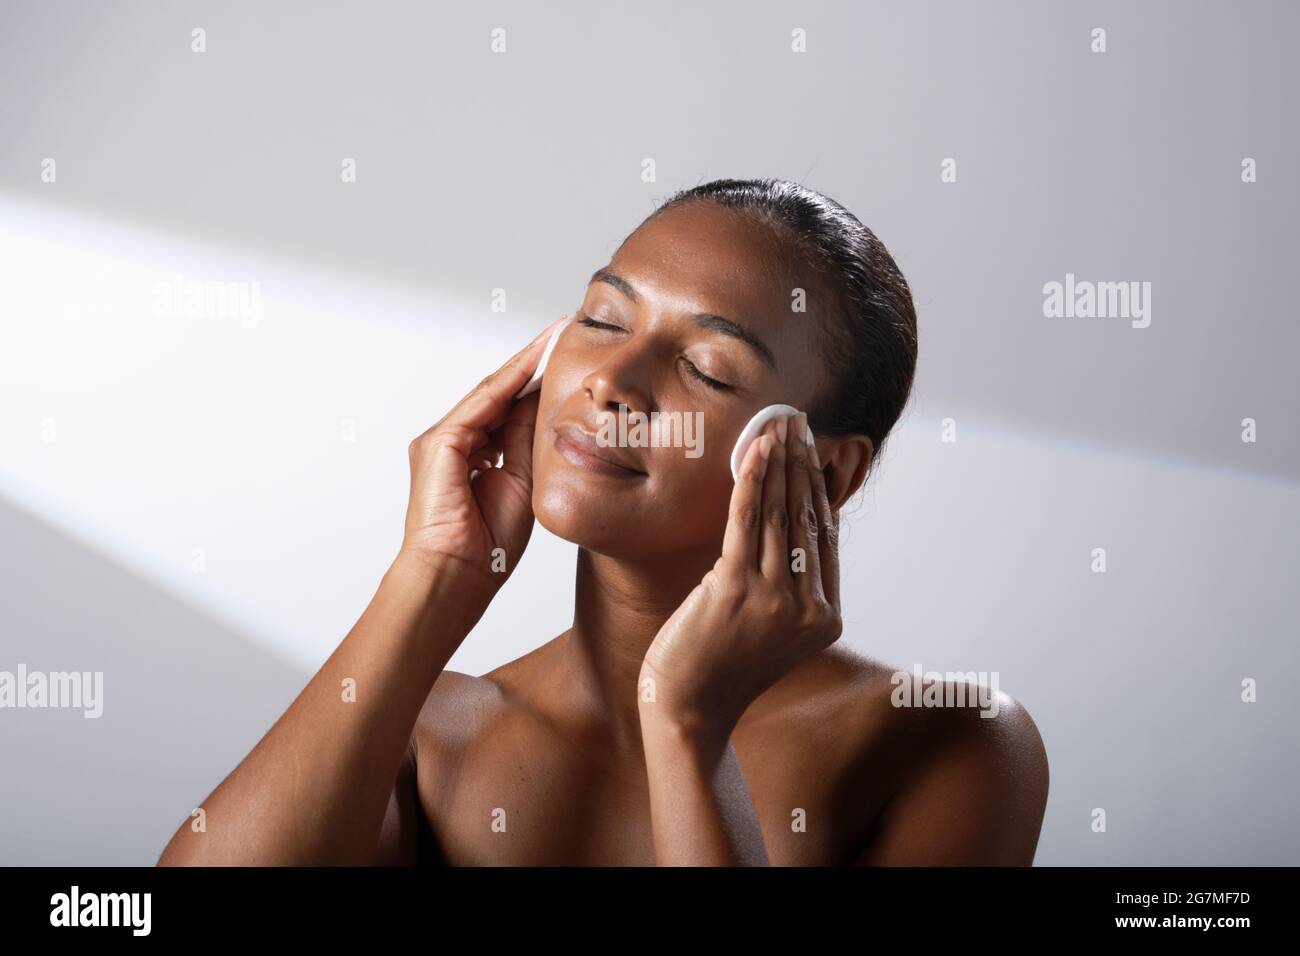 Beauty images of a woman with darker skin tone. Head and shoulder pictures of contented, happy lady using cotton face pads. Stock Photo